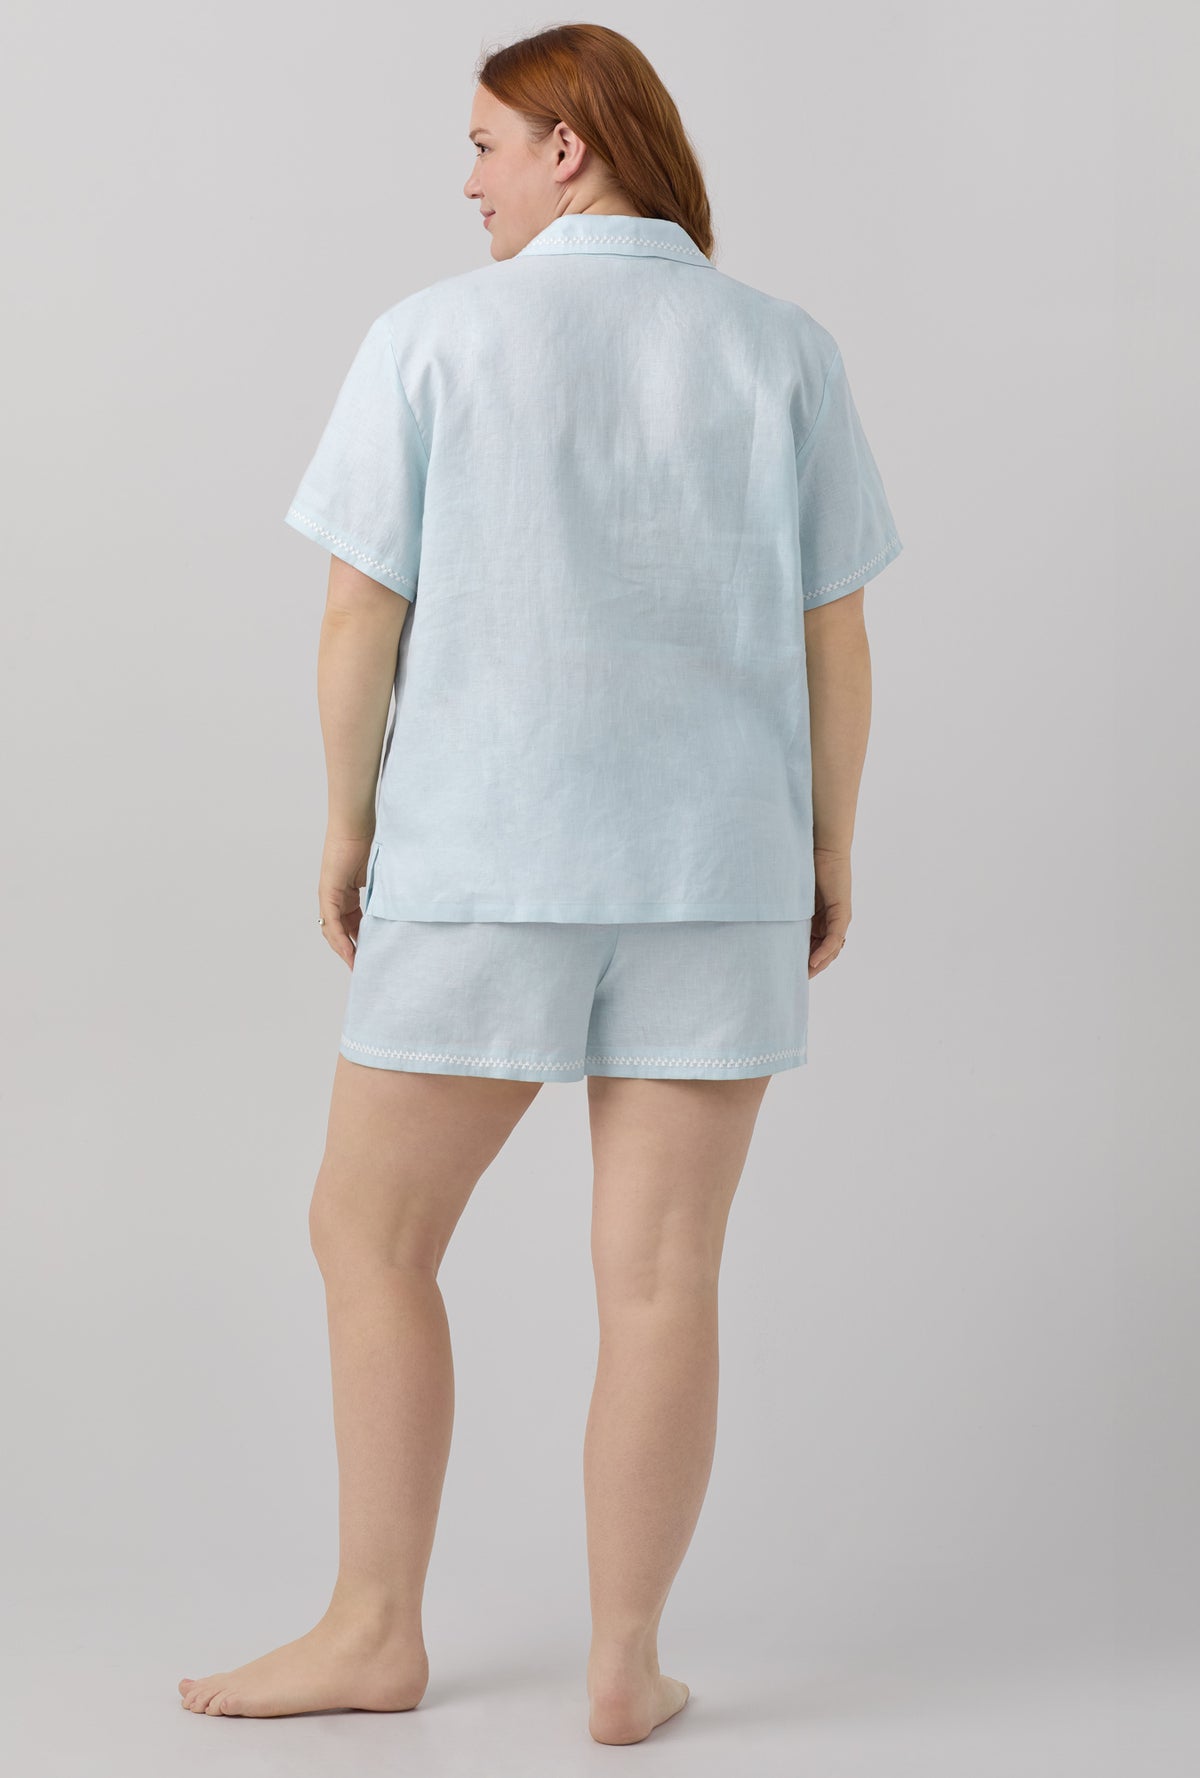 A lady wearing blue short sleeve classic shorty woven linen plus size pj set with delicate blue print.